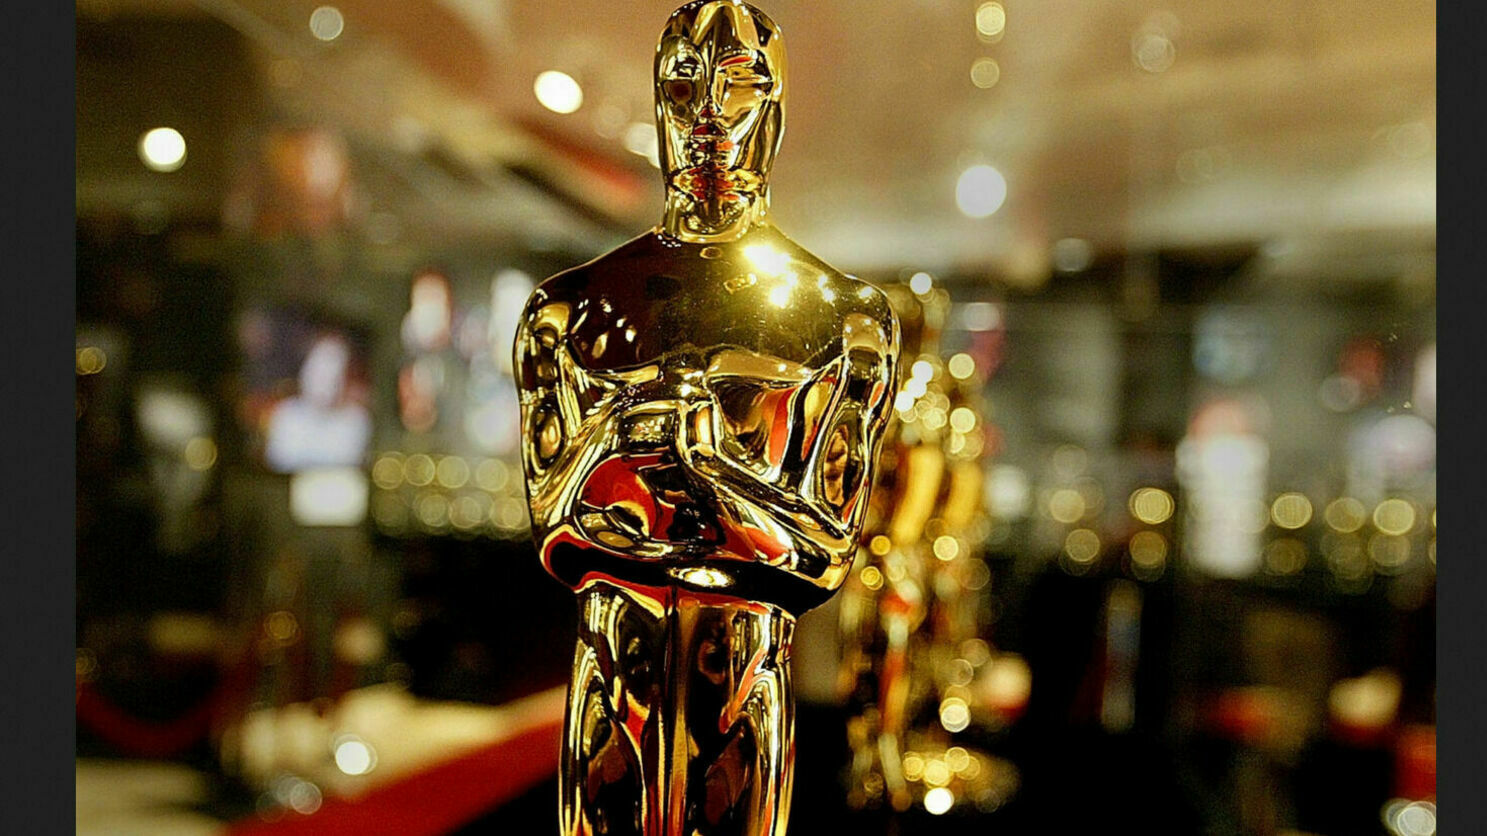 "Gender" nominations for best actor and actress may be canceled at the Oscars